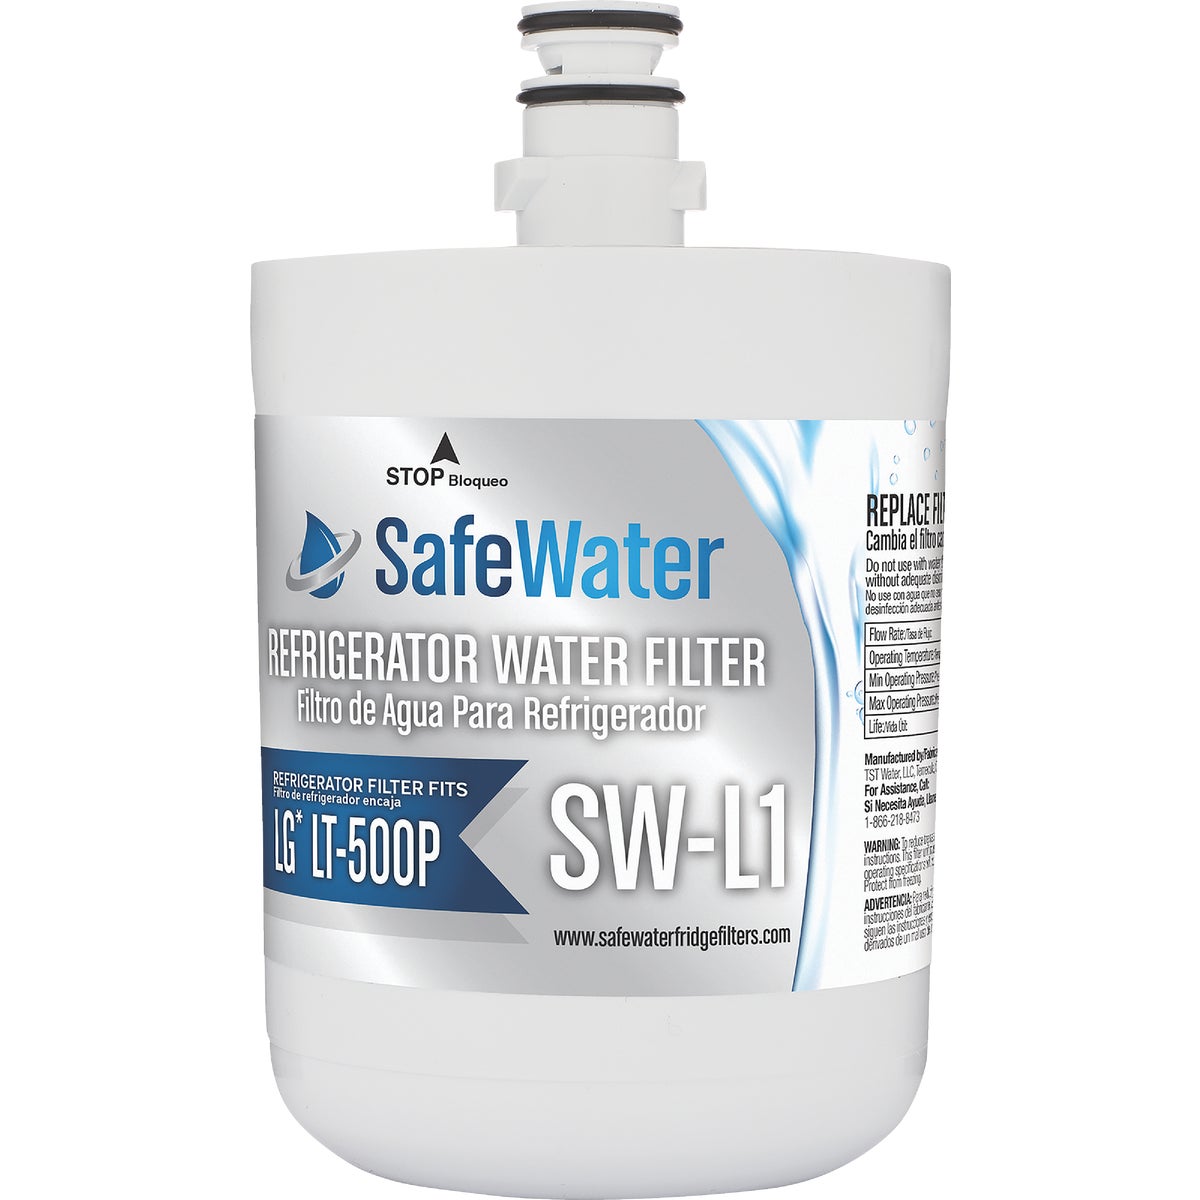 Item 401772, This EarthSmart replacement refrigerator water filter fits in place of LG 